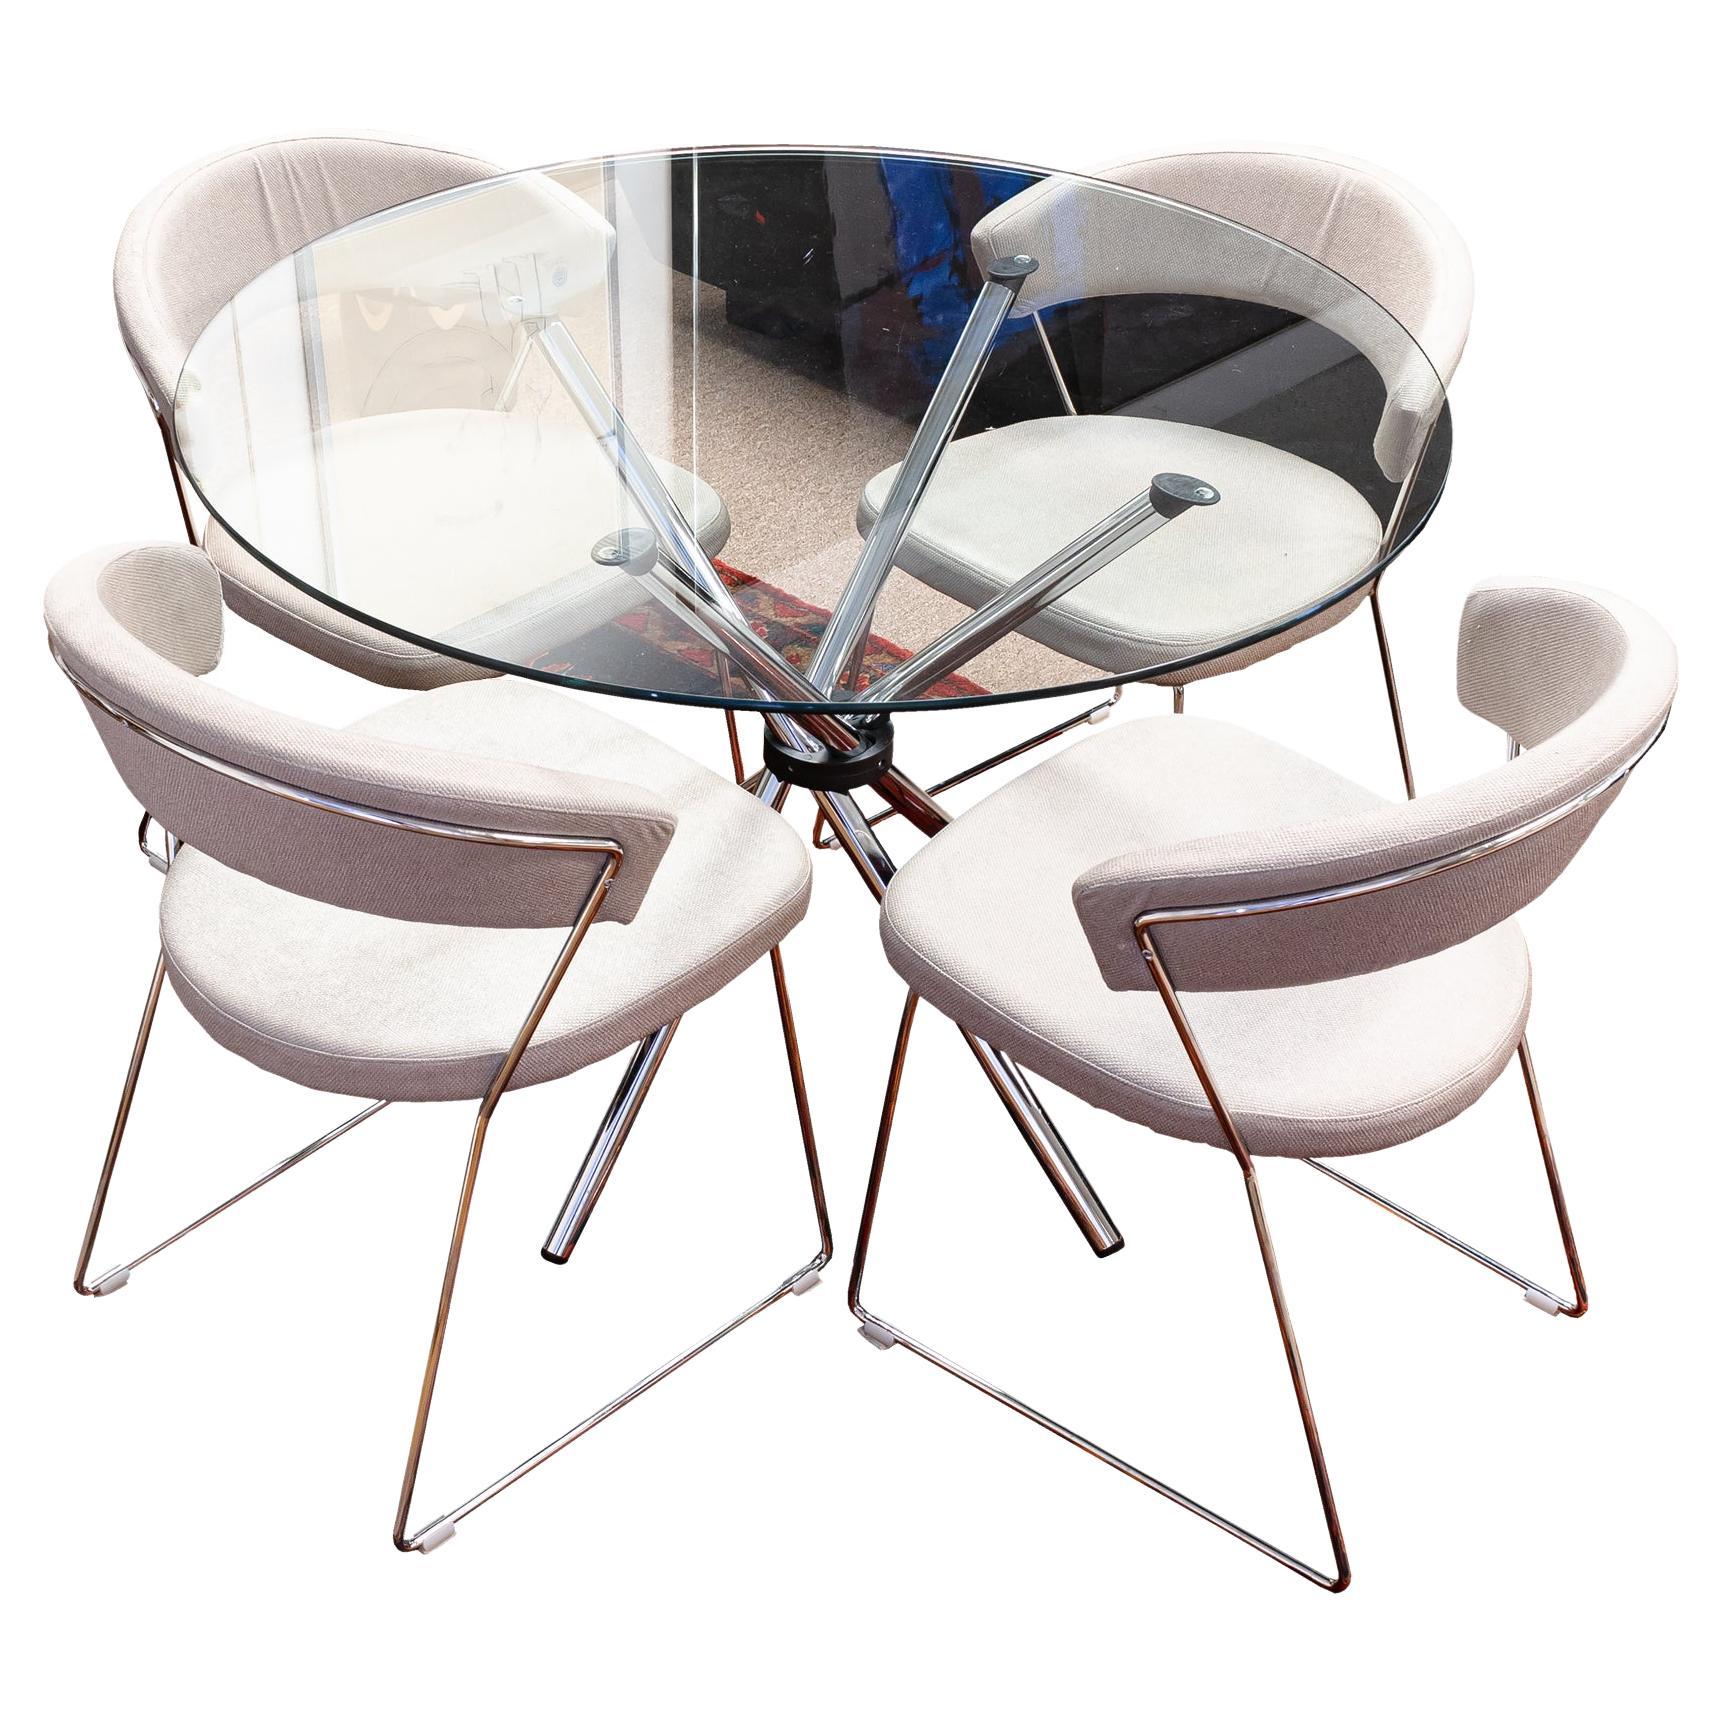 Modern Round Chrome and Glass Dinette Gallery Base Table & 4 Calligaris Chairs